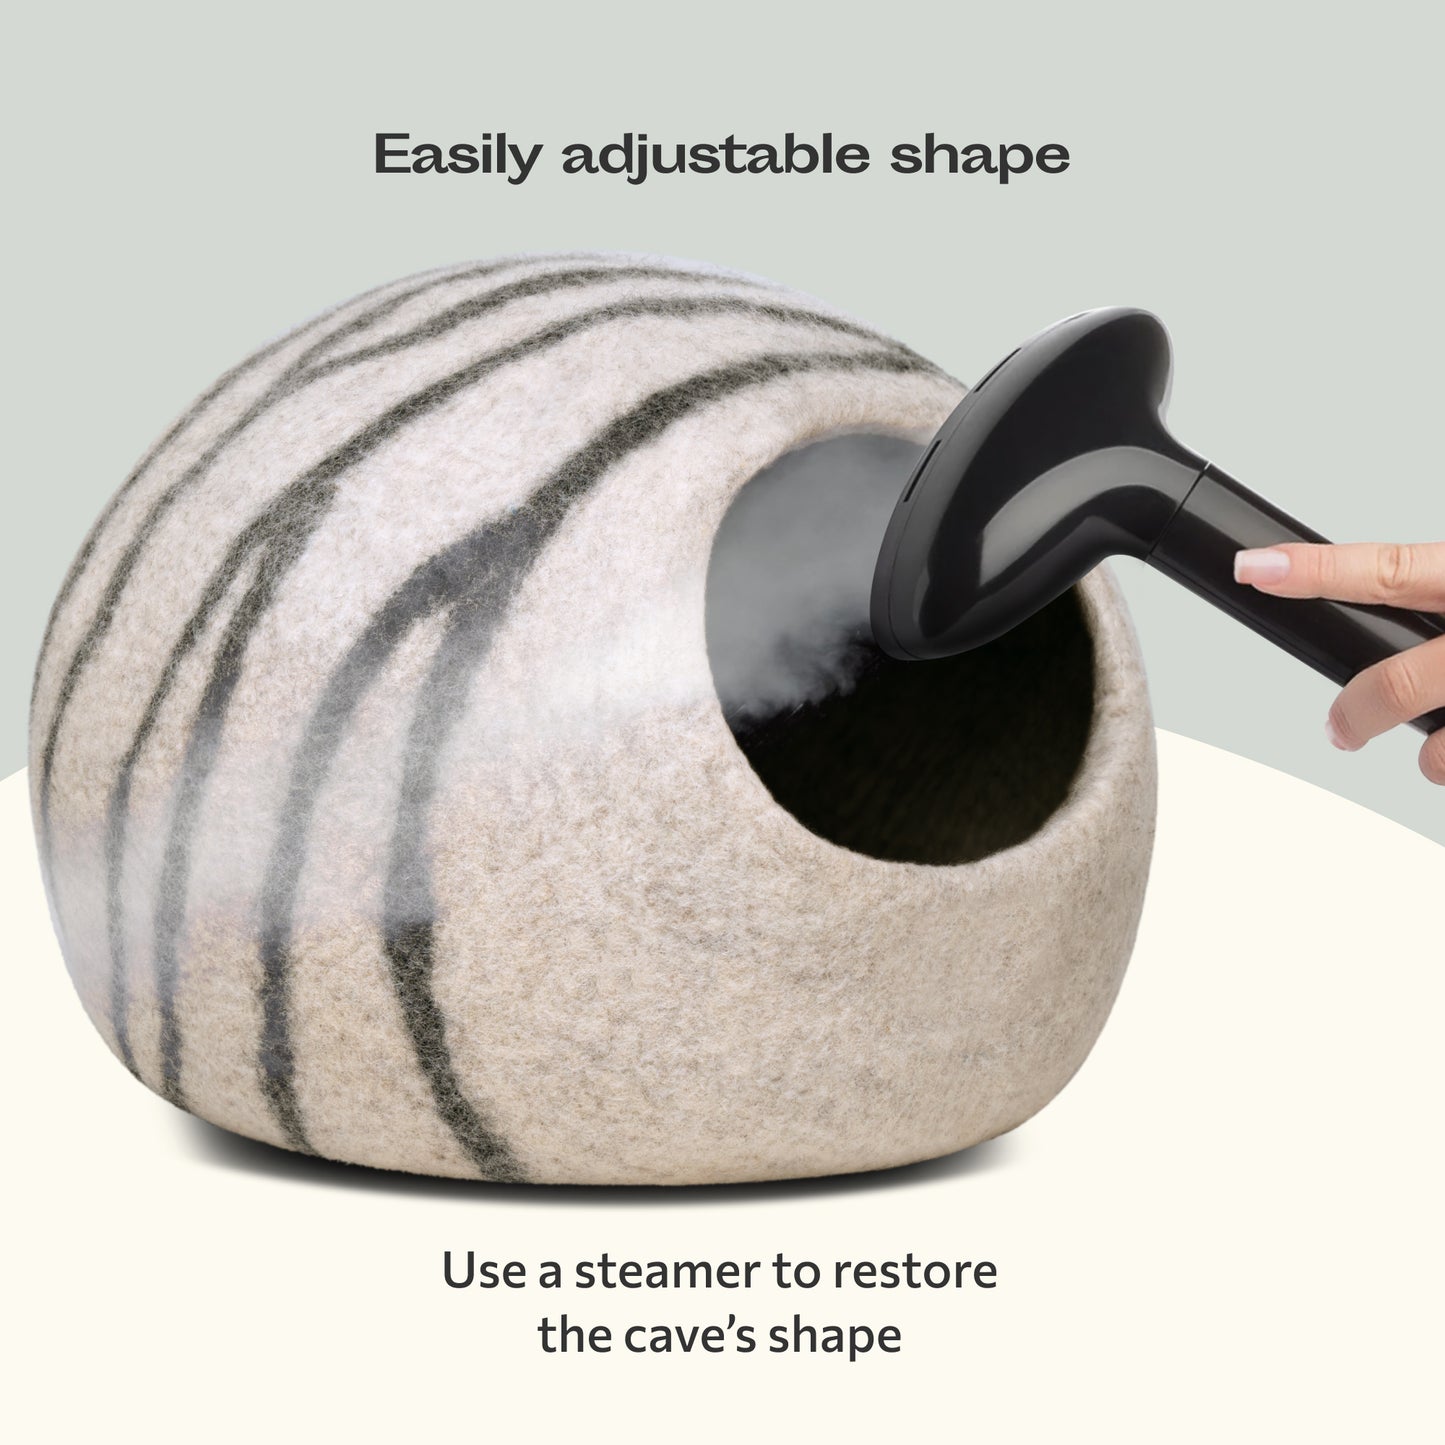 use a streamer to restore the cave's shape